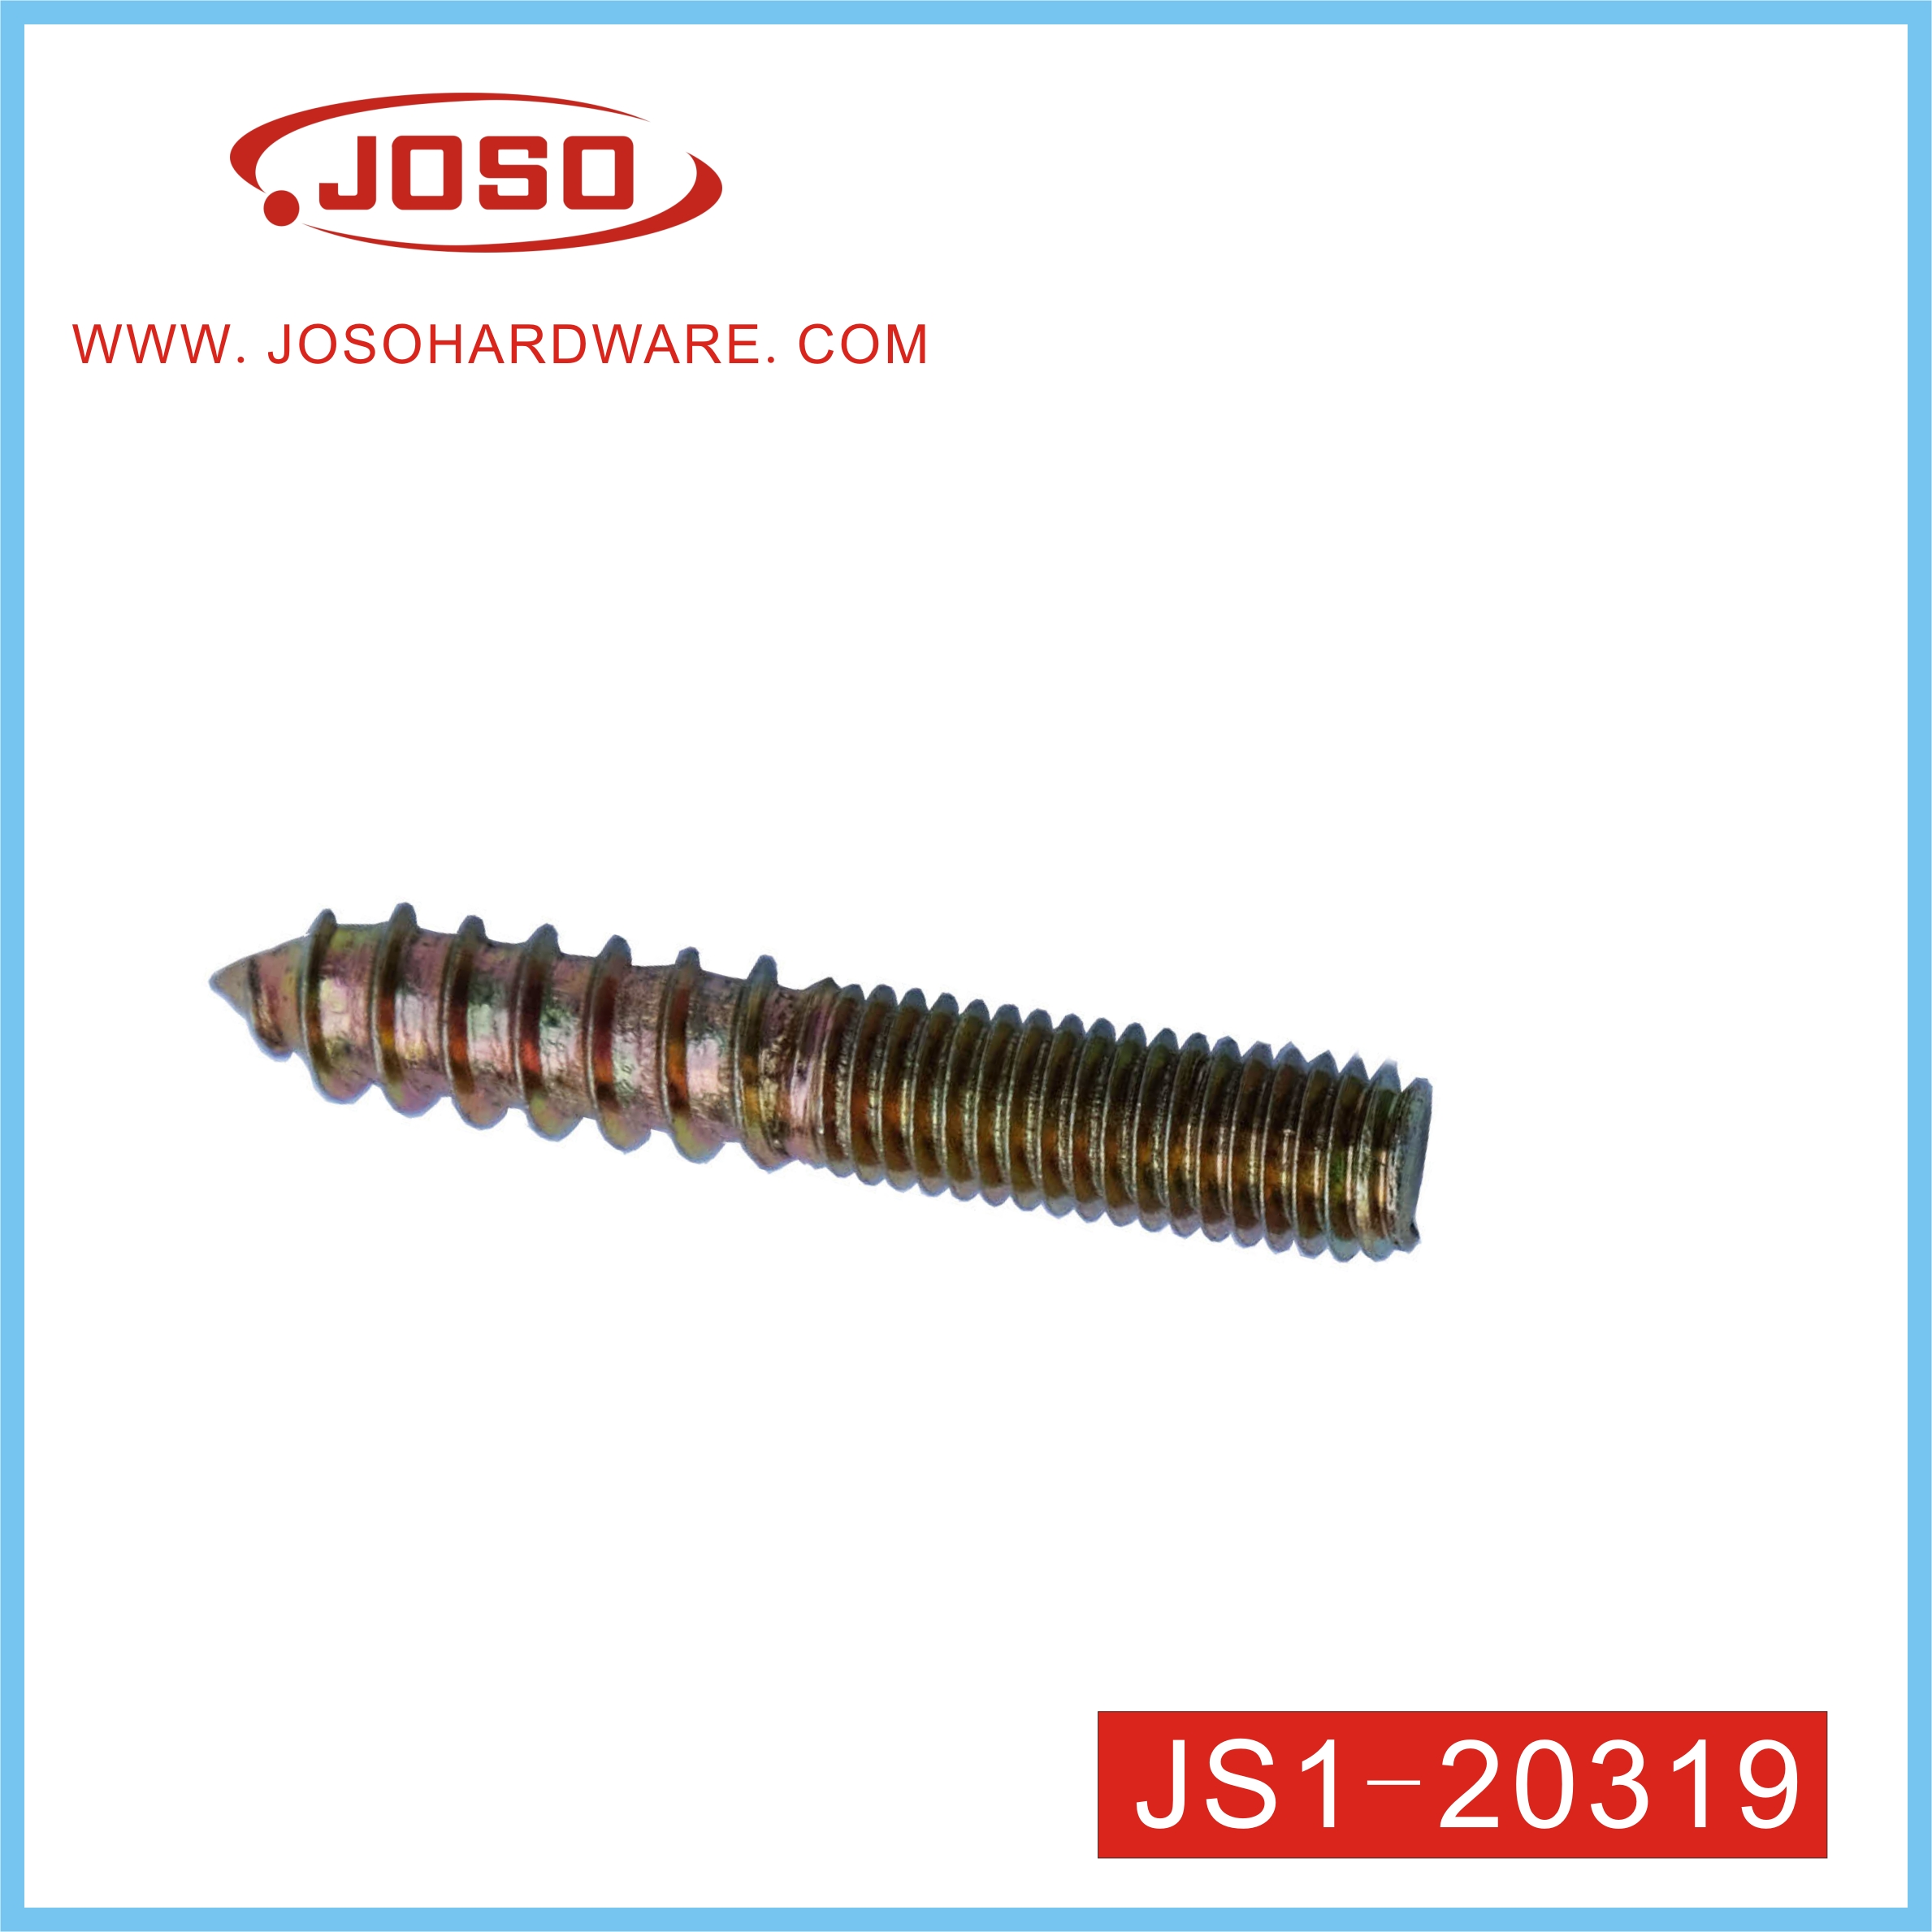 Metal M8 Double Thread Stud Bolt of Accessories for Furniture